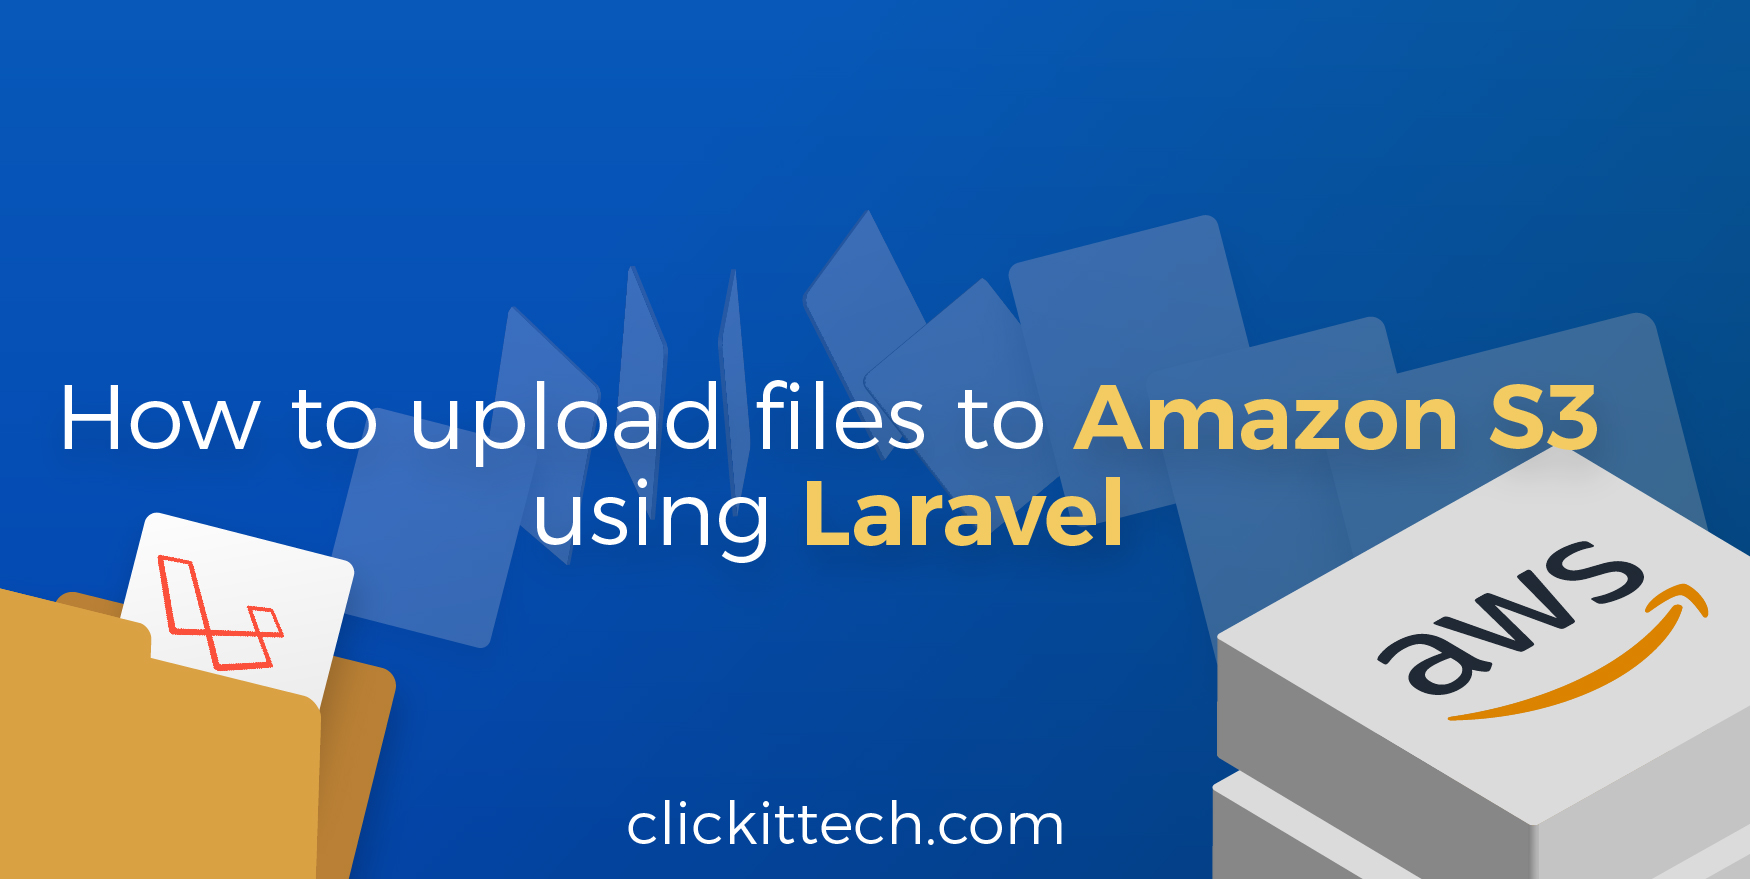 How To Upload Files To Amazon S3 Using Laravel Images, Photos, Reviews